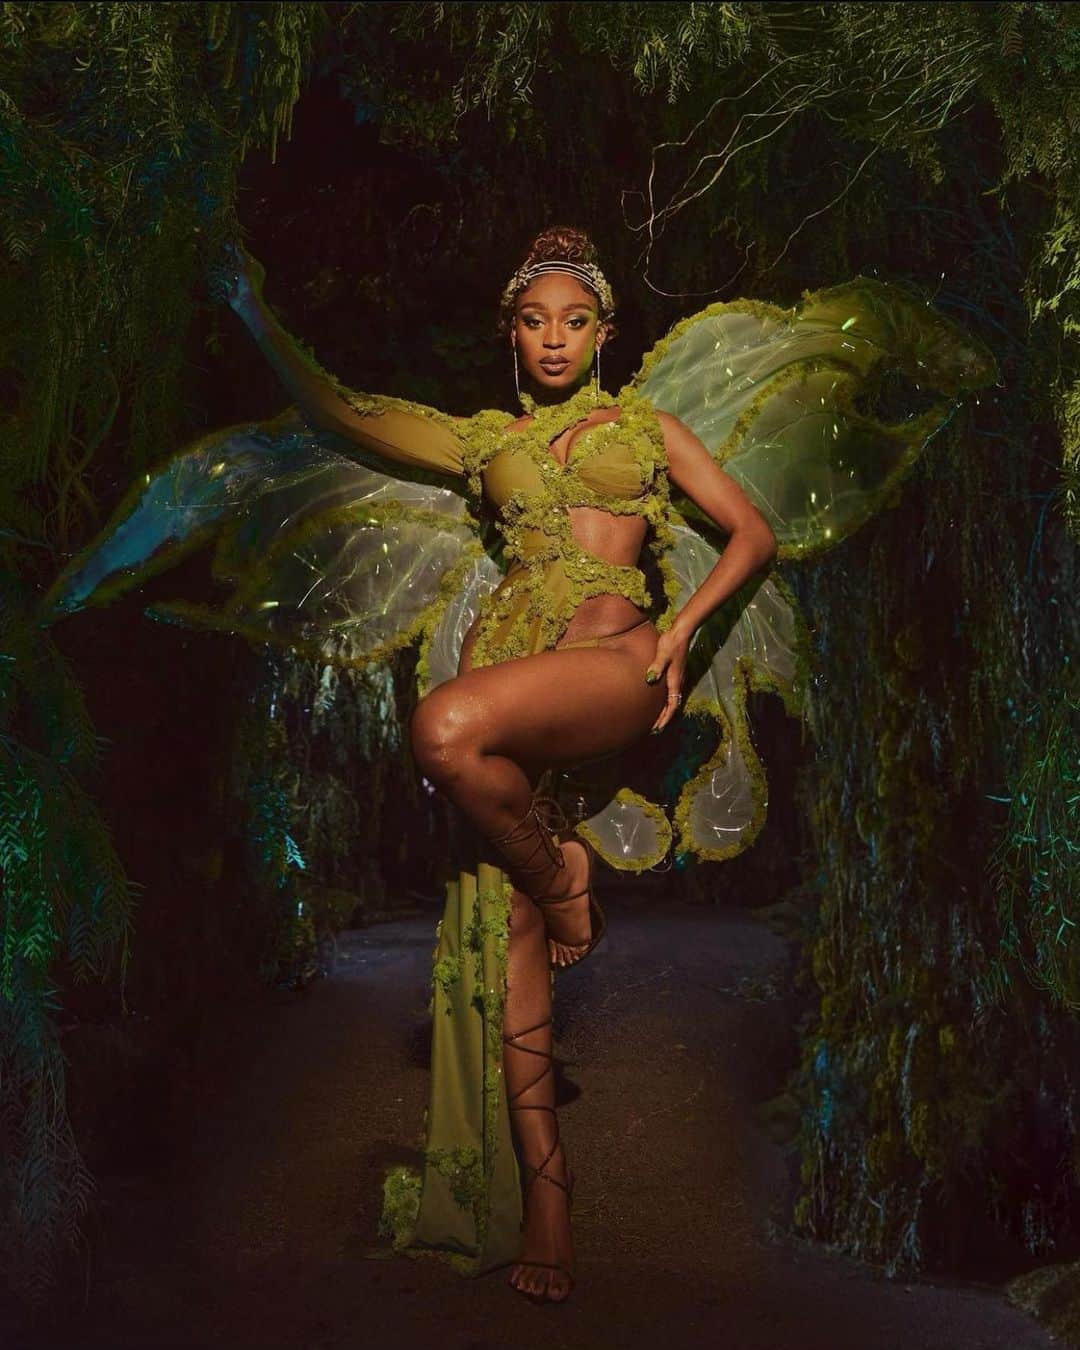 Fashion Climaxxのインスタグラム：「Fashion Designer @asanchezfashion Transformed @normani into an #enchantedfairy wearing a olive moss covered dress, headpiece and fiber optic light up fairy wings!! 🧚 WOW!! You did that bestie 🙇🏻‍♀️ I’m OBSESSED!!!  . . . .  #byadolfosanchez #fashion #halloween2021 #fairy #enchanted #haute #hot #sexy #fire #gorgeous #normani #everything #slayed #halloween #sexycostume #losangeles #la #designer #fairytale #fashiondesigner」